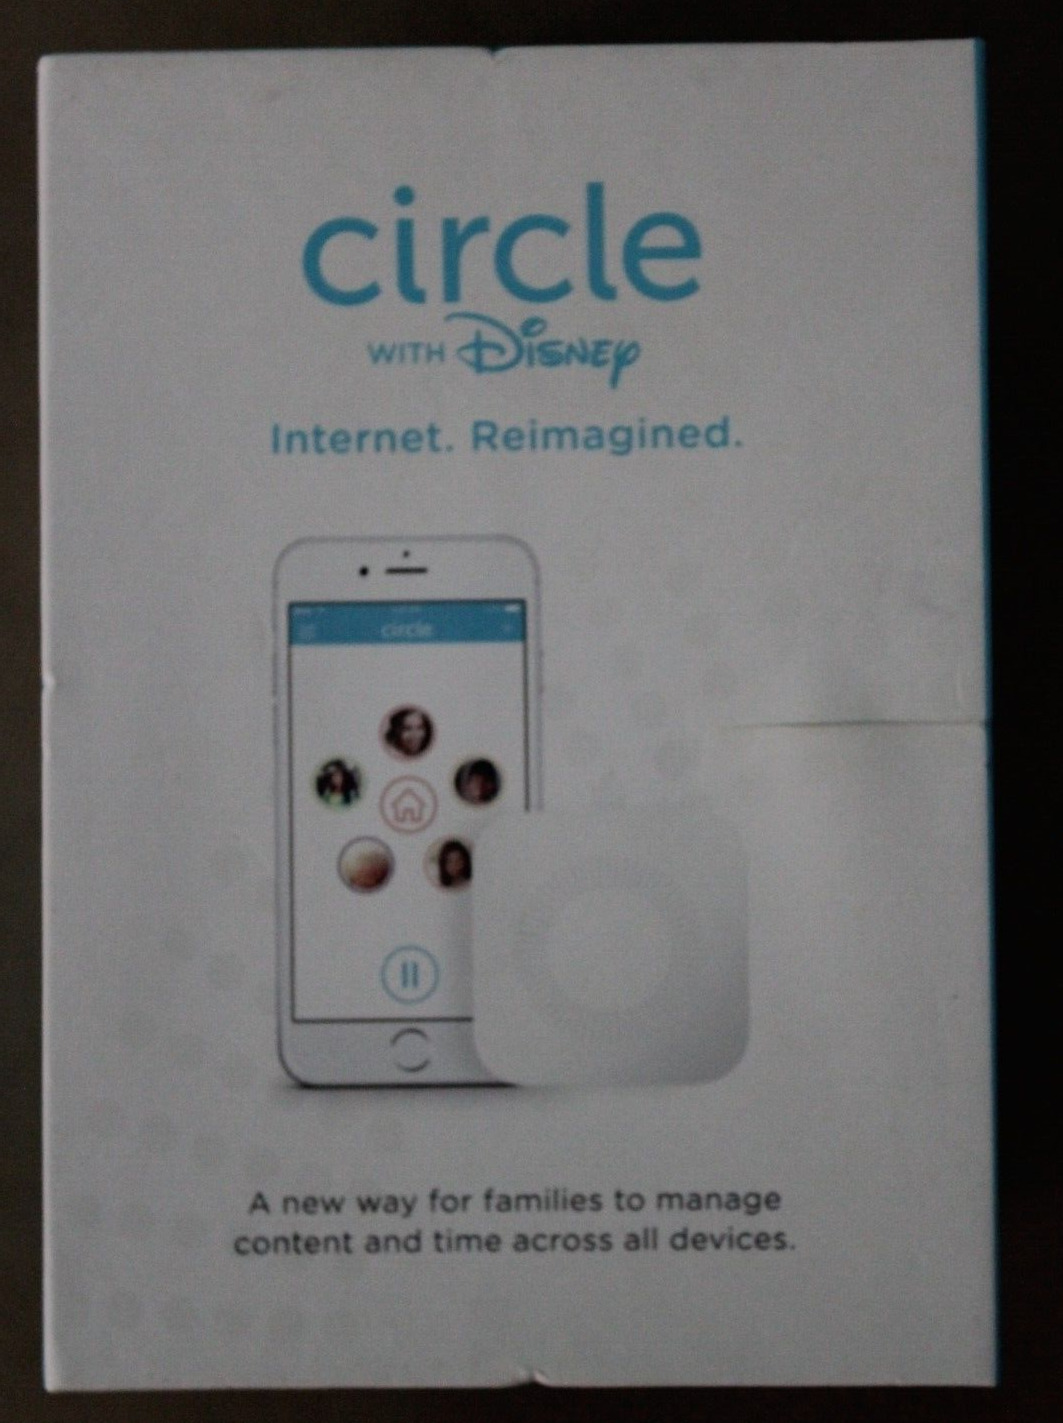 Circle With Disney Internet Filter And Parental Hardware V1 Smart Family Device